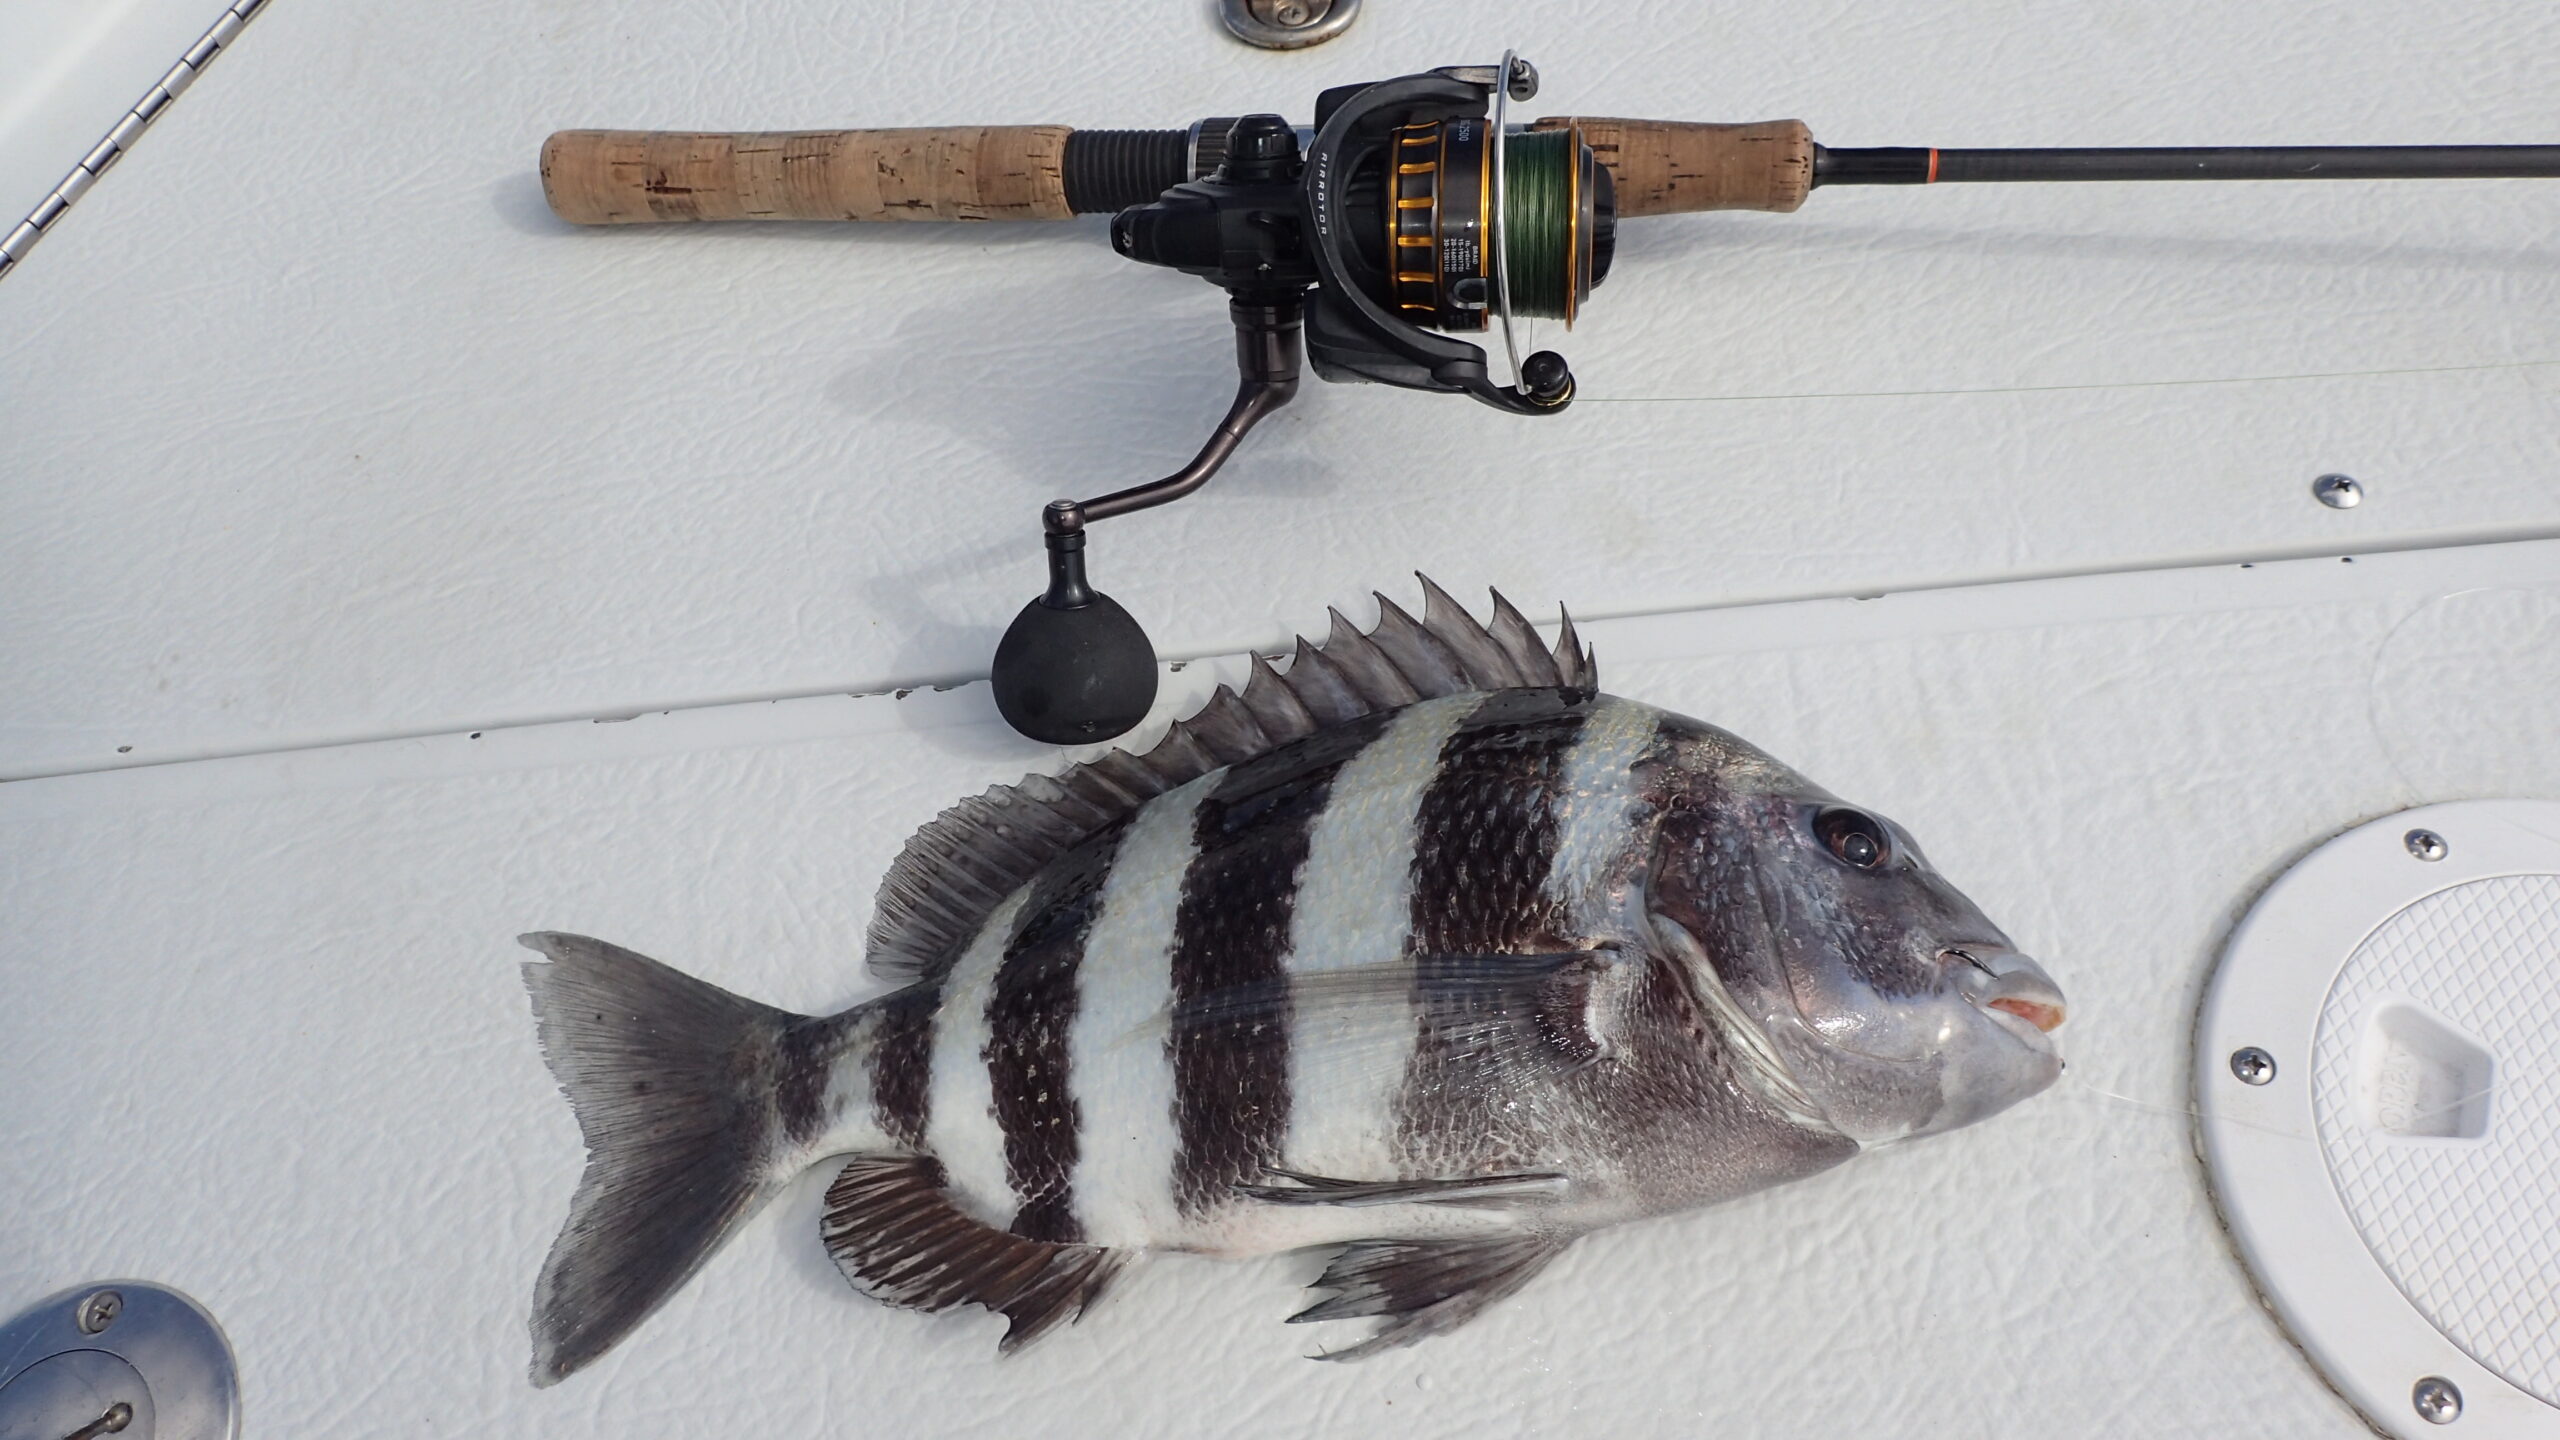 A sheepshead caught with the Daiwa BG spinning reel.